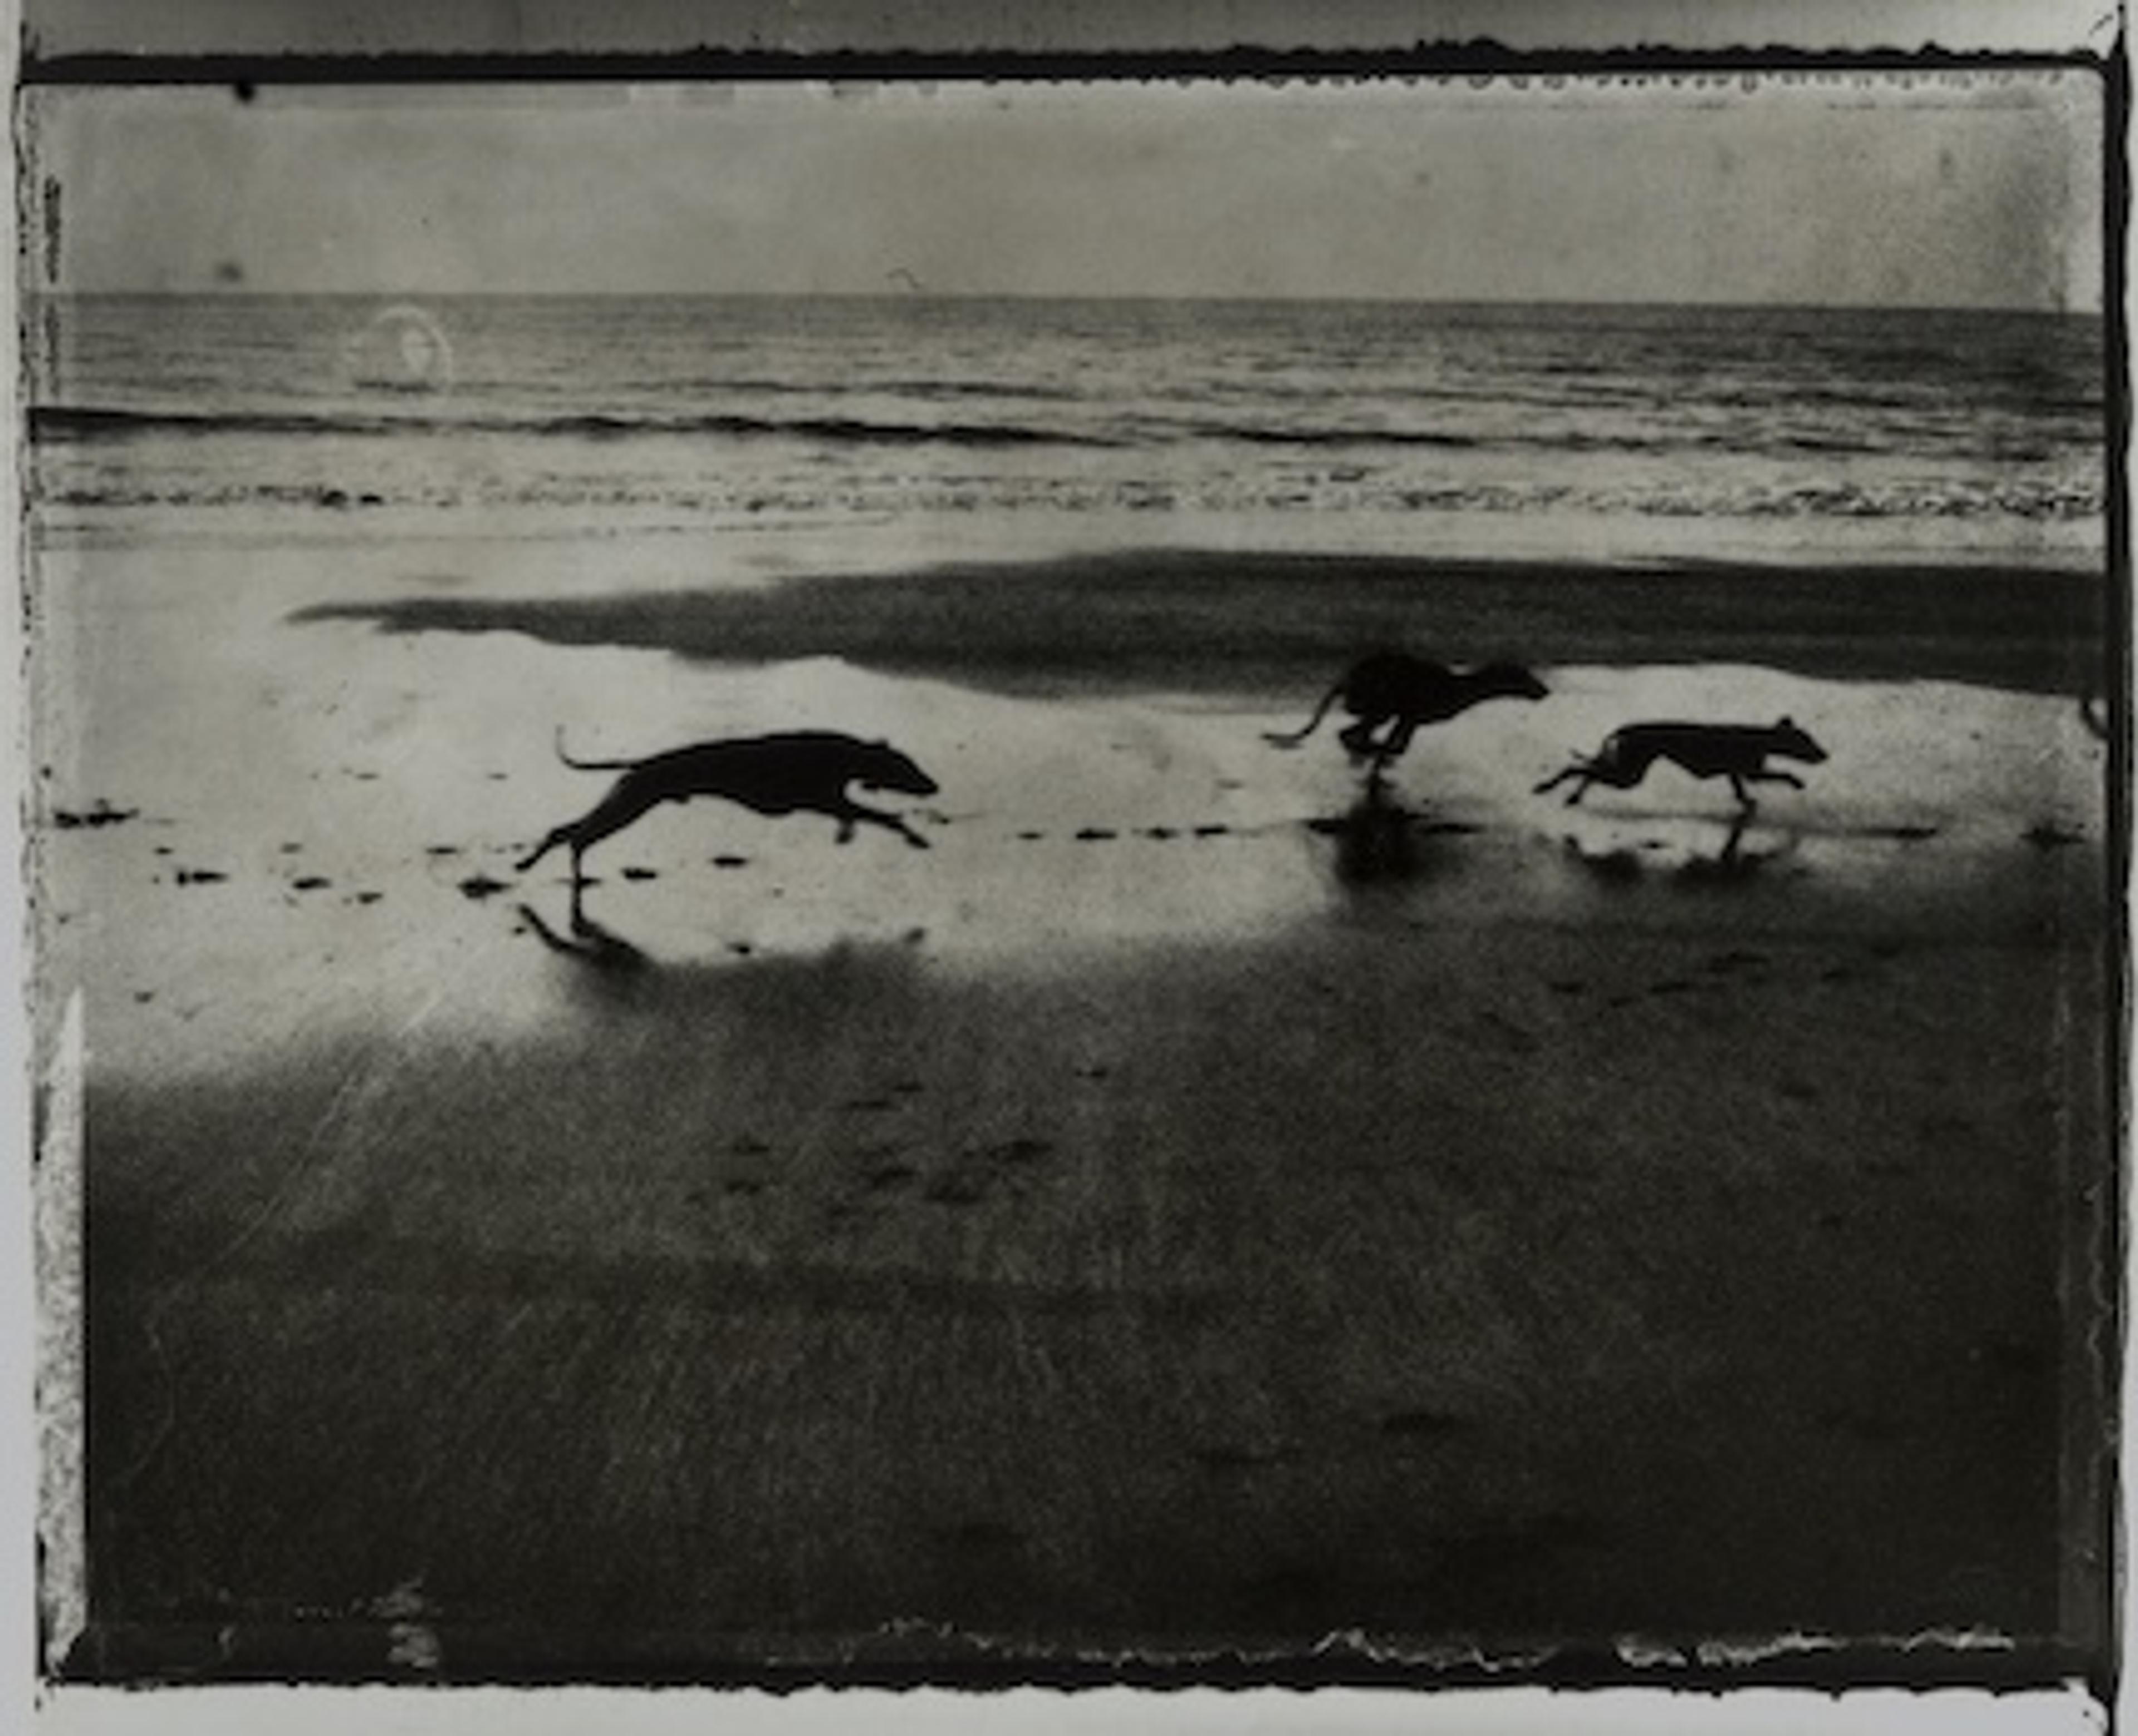 A dark photograph of large dogs running on a beach